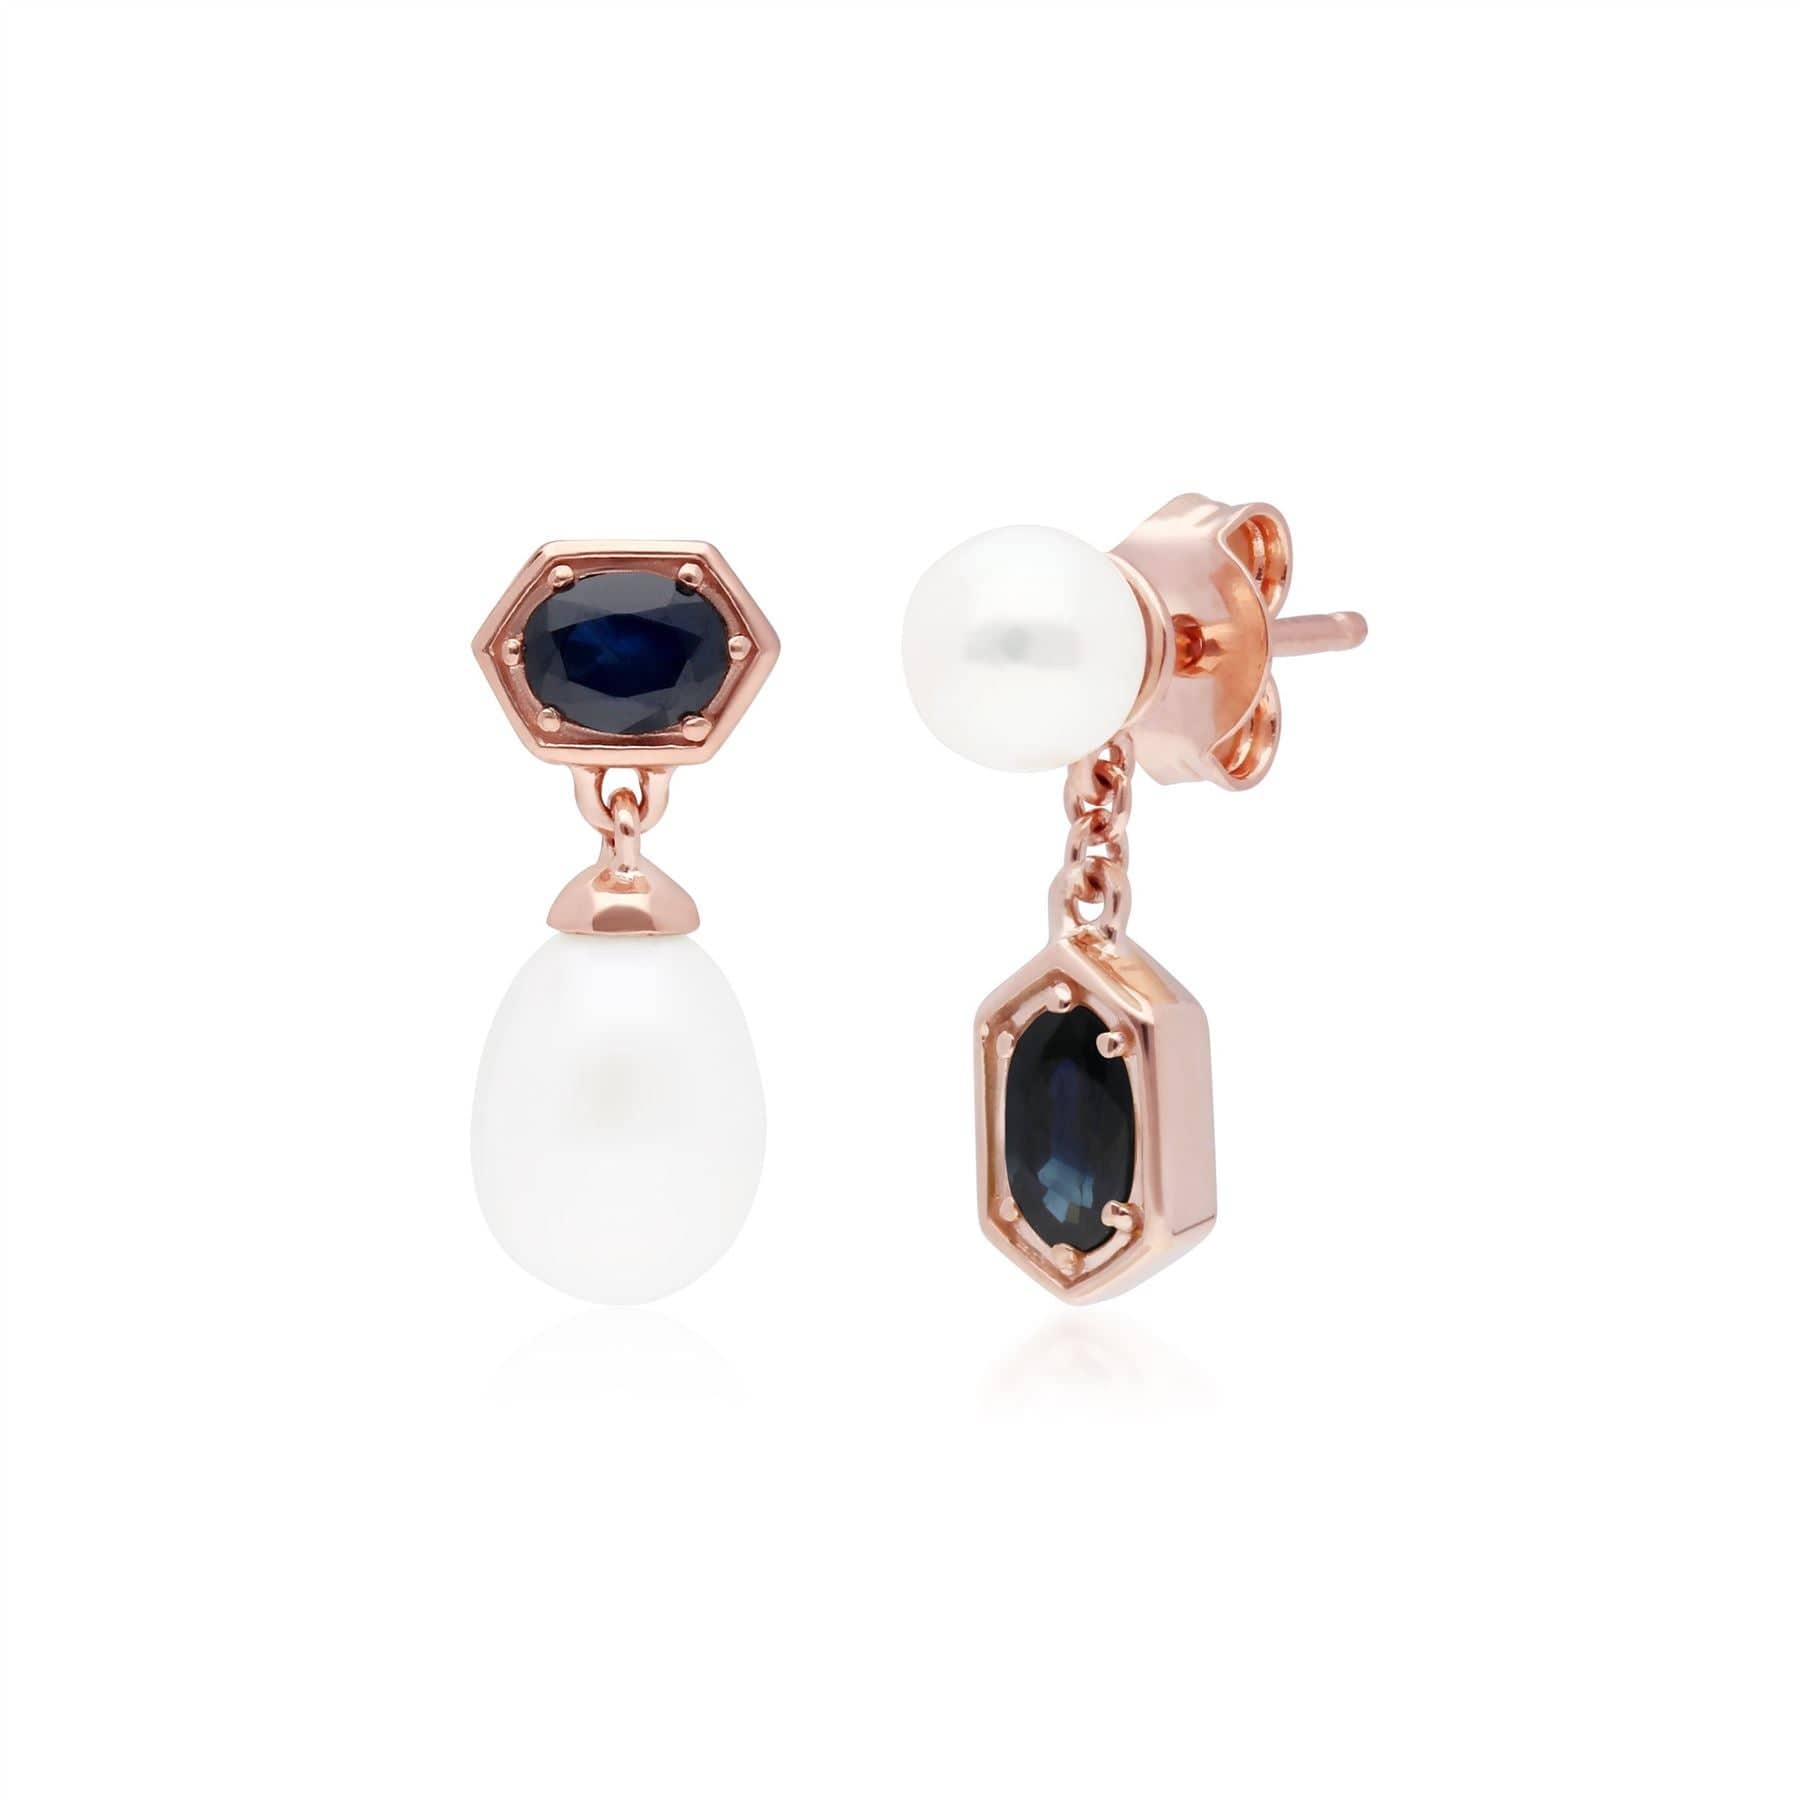 Modern Pearl & Sapphire Mismatched Drop Earrings in Rose Gold Plated 925 Sterling Silver